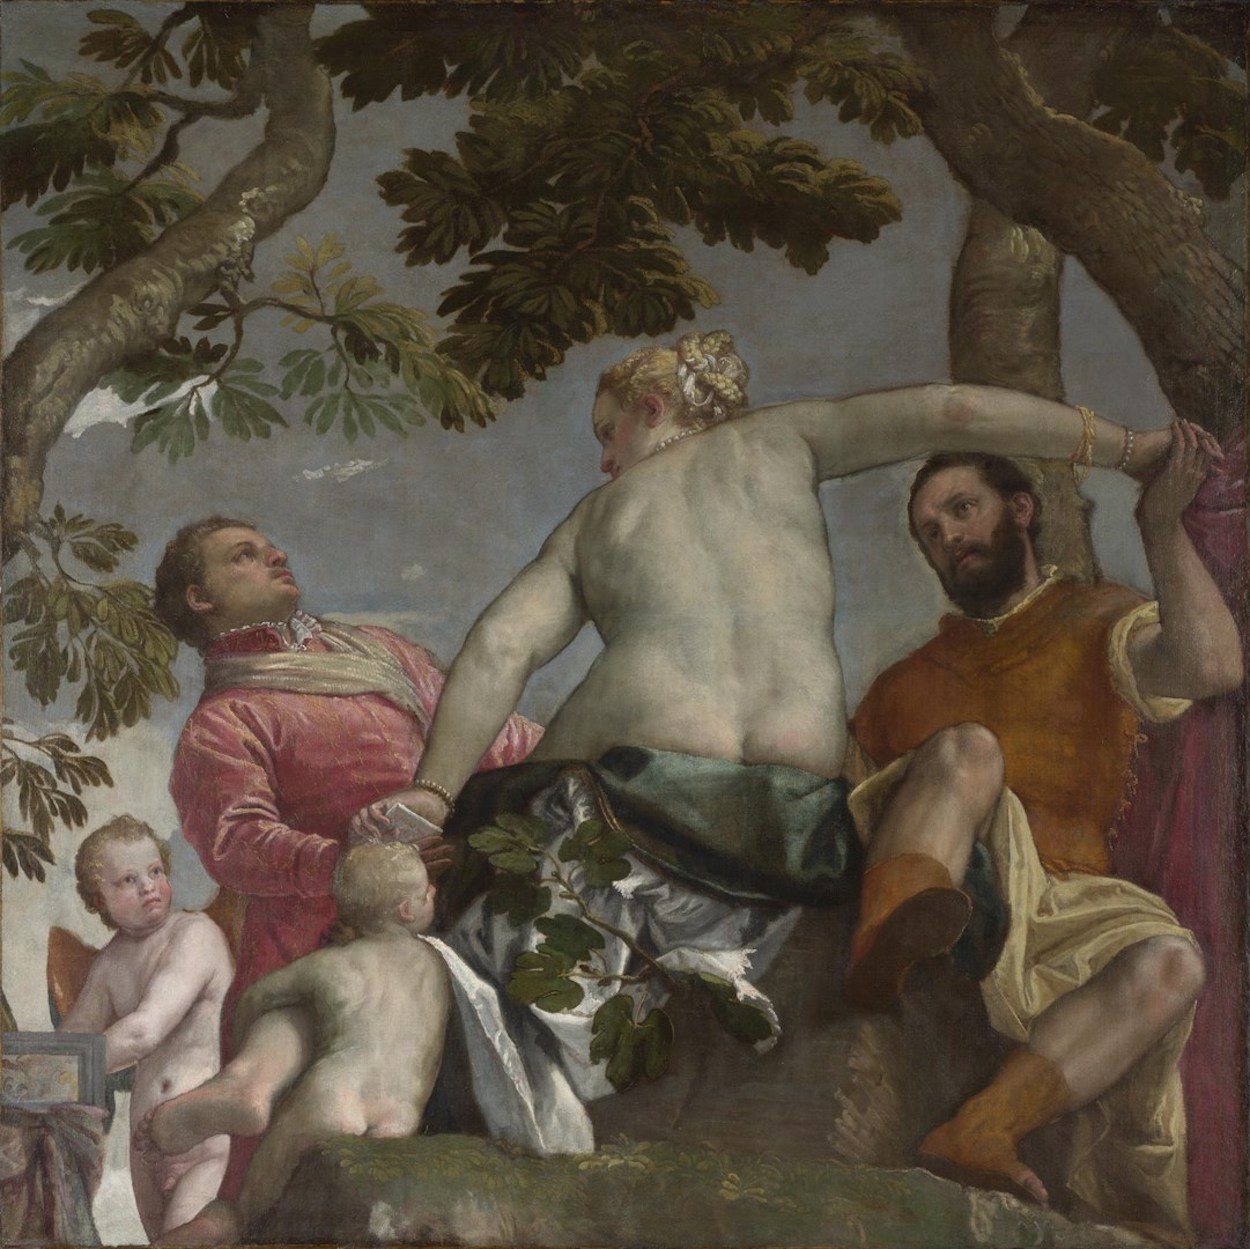 Ontrouw by Paolo Veronese - about 1575 - 189.9 x 189.9 cm 